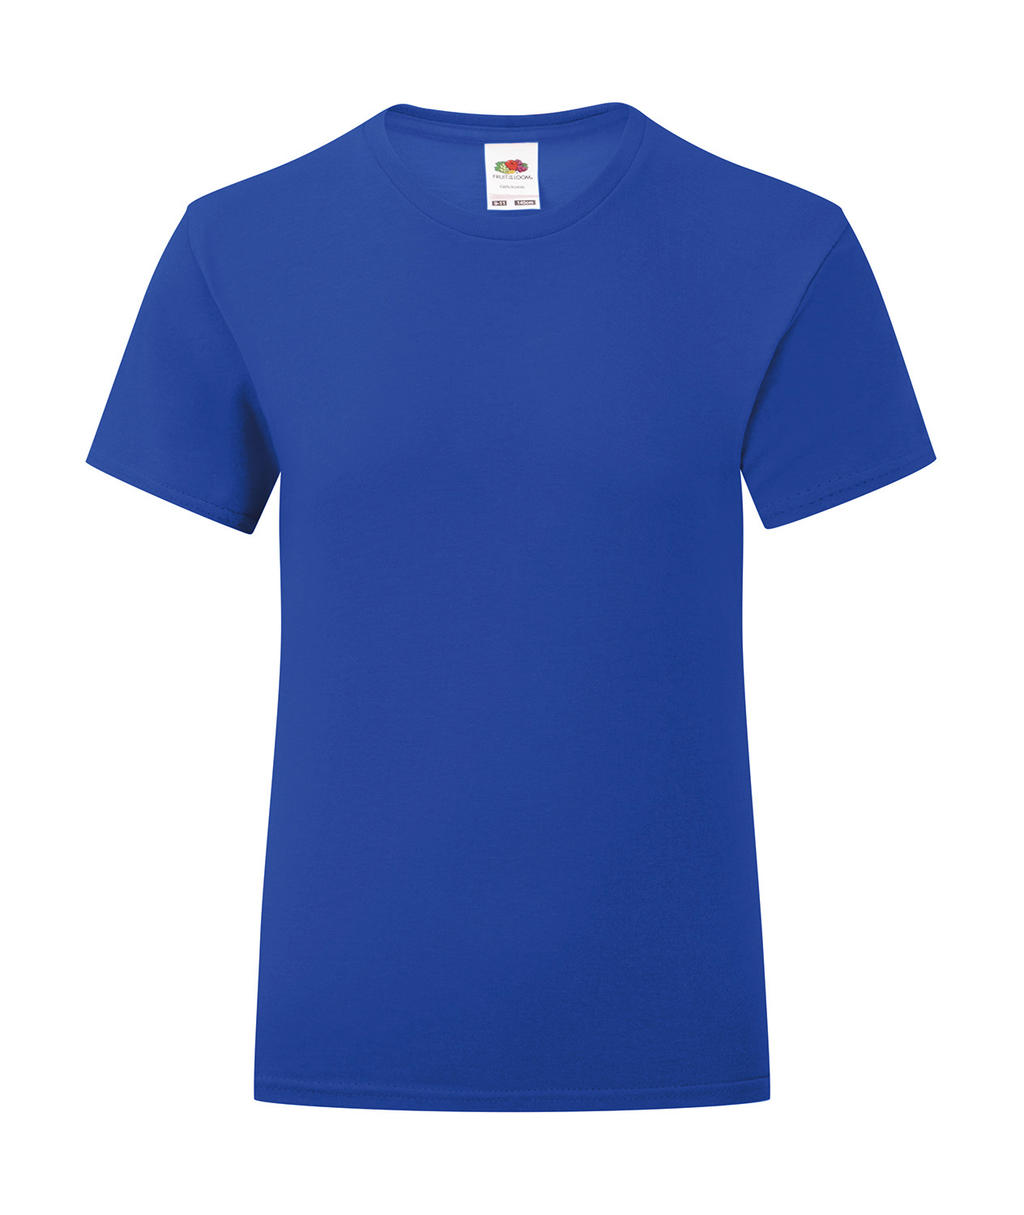  Girls Iconic 150 T in Farbe Royal Blue